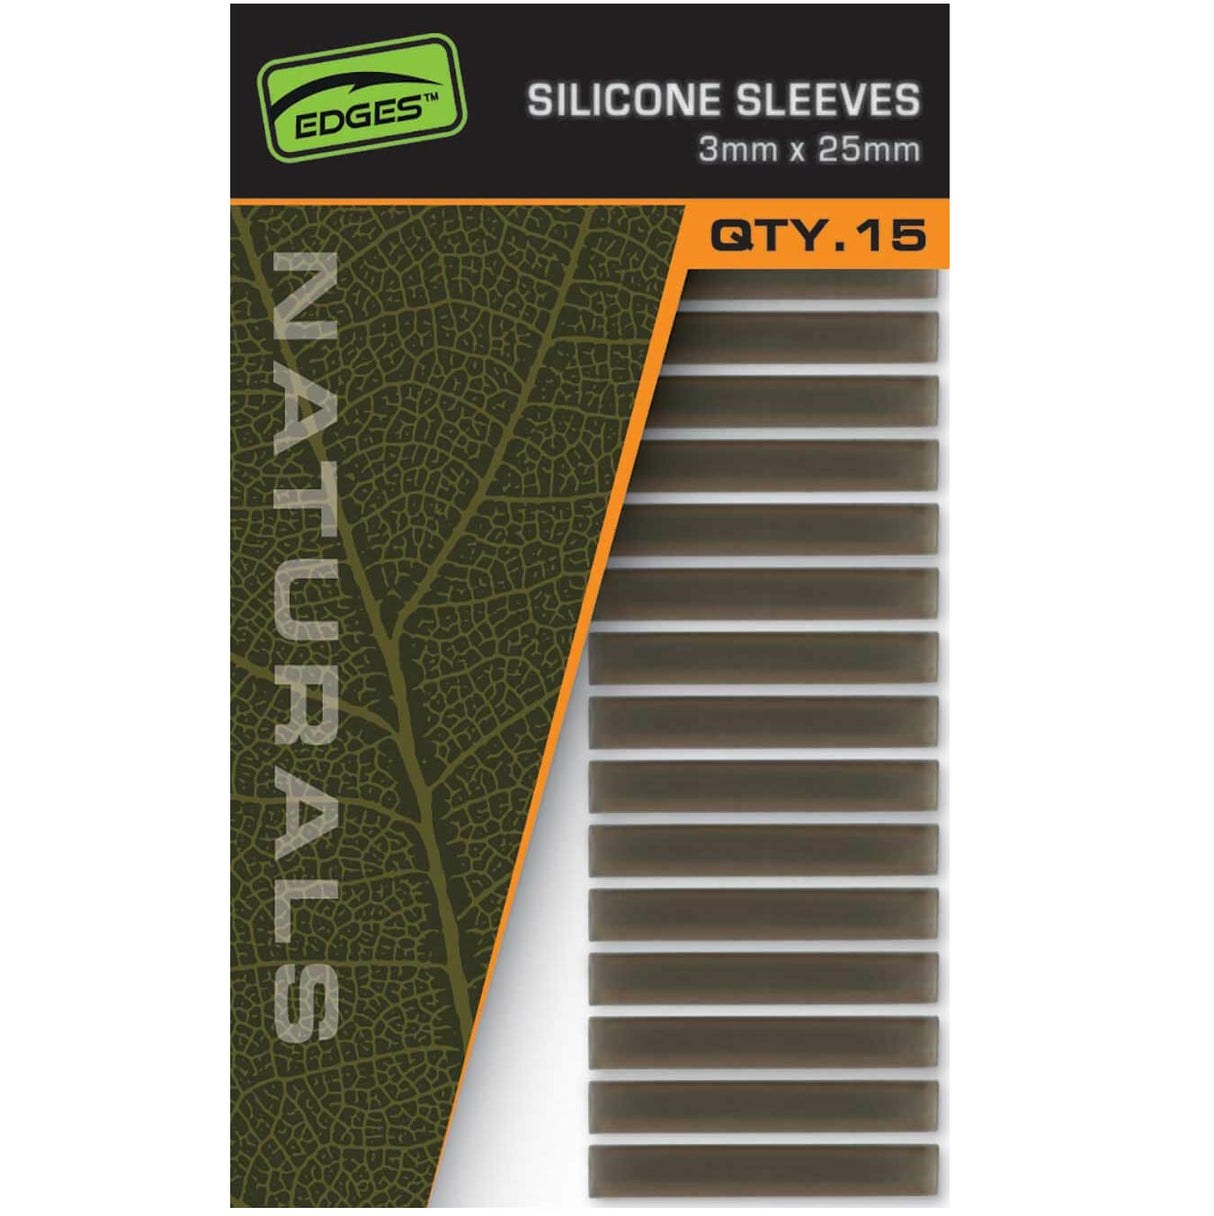 Sleeves Silicone Fox Naturals 3mm x 25mm